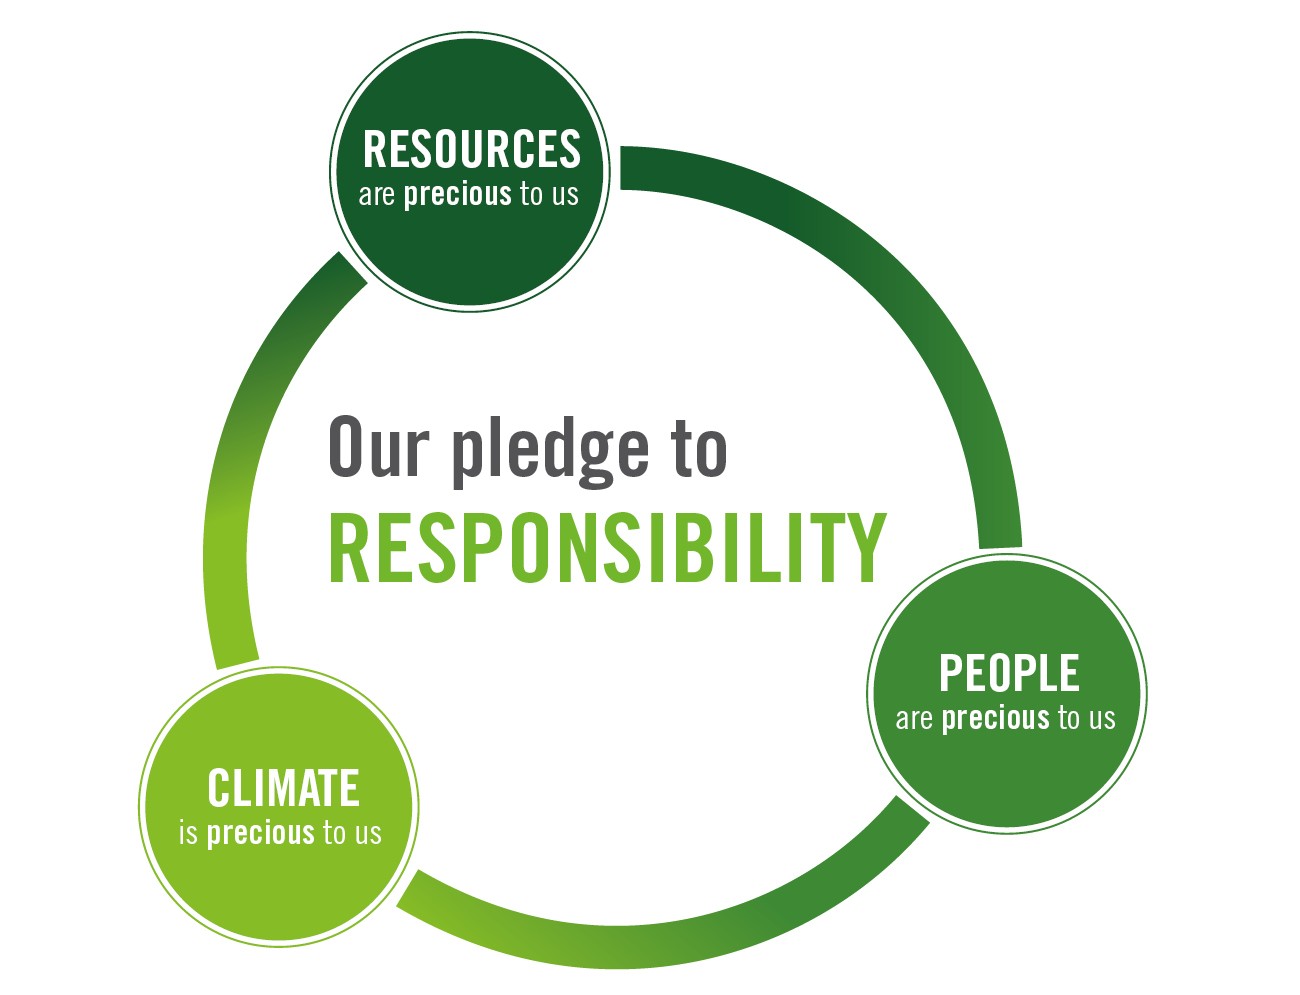 Our pledge to responsibility